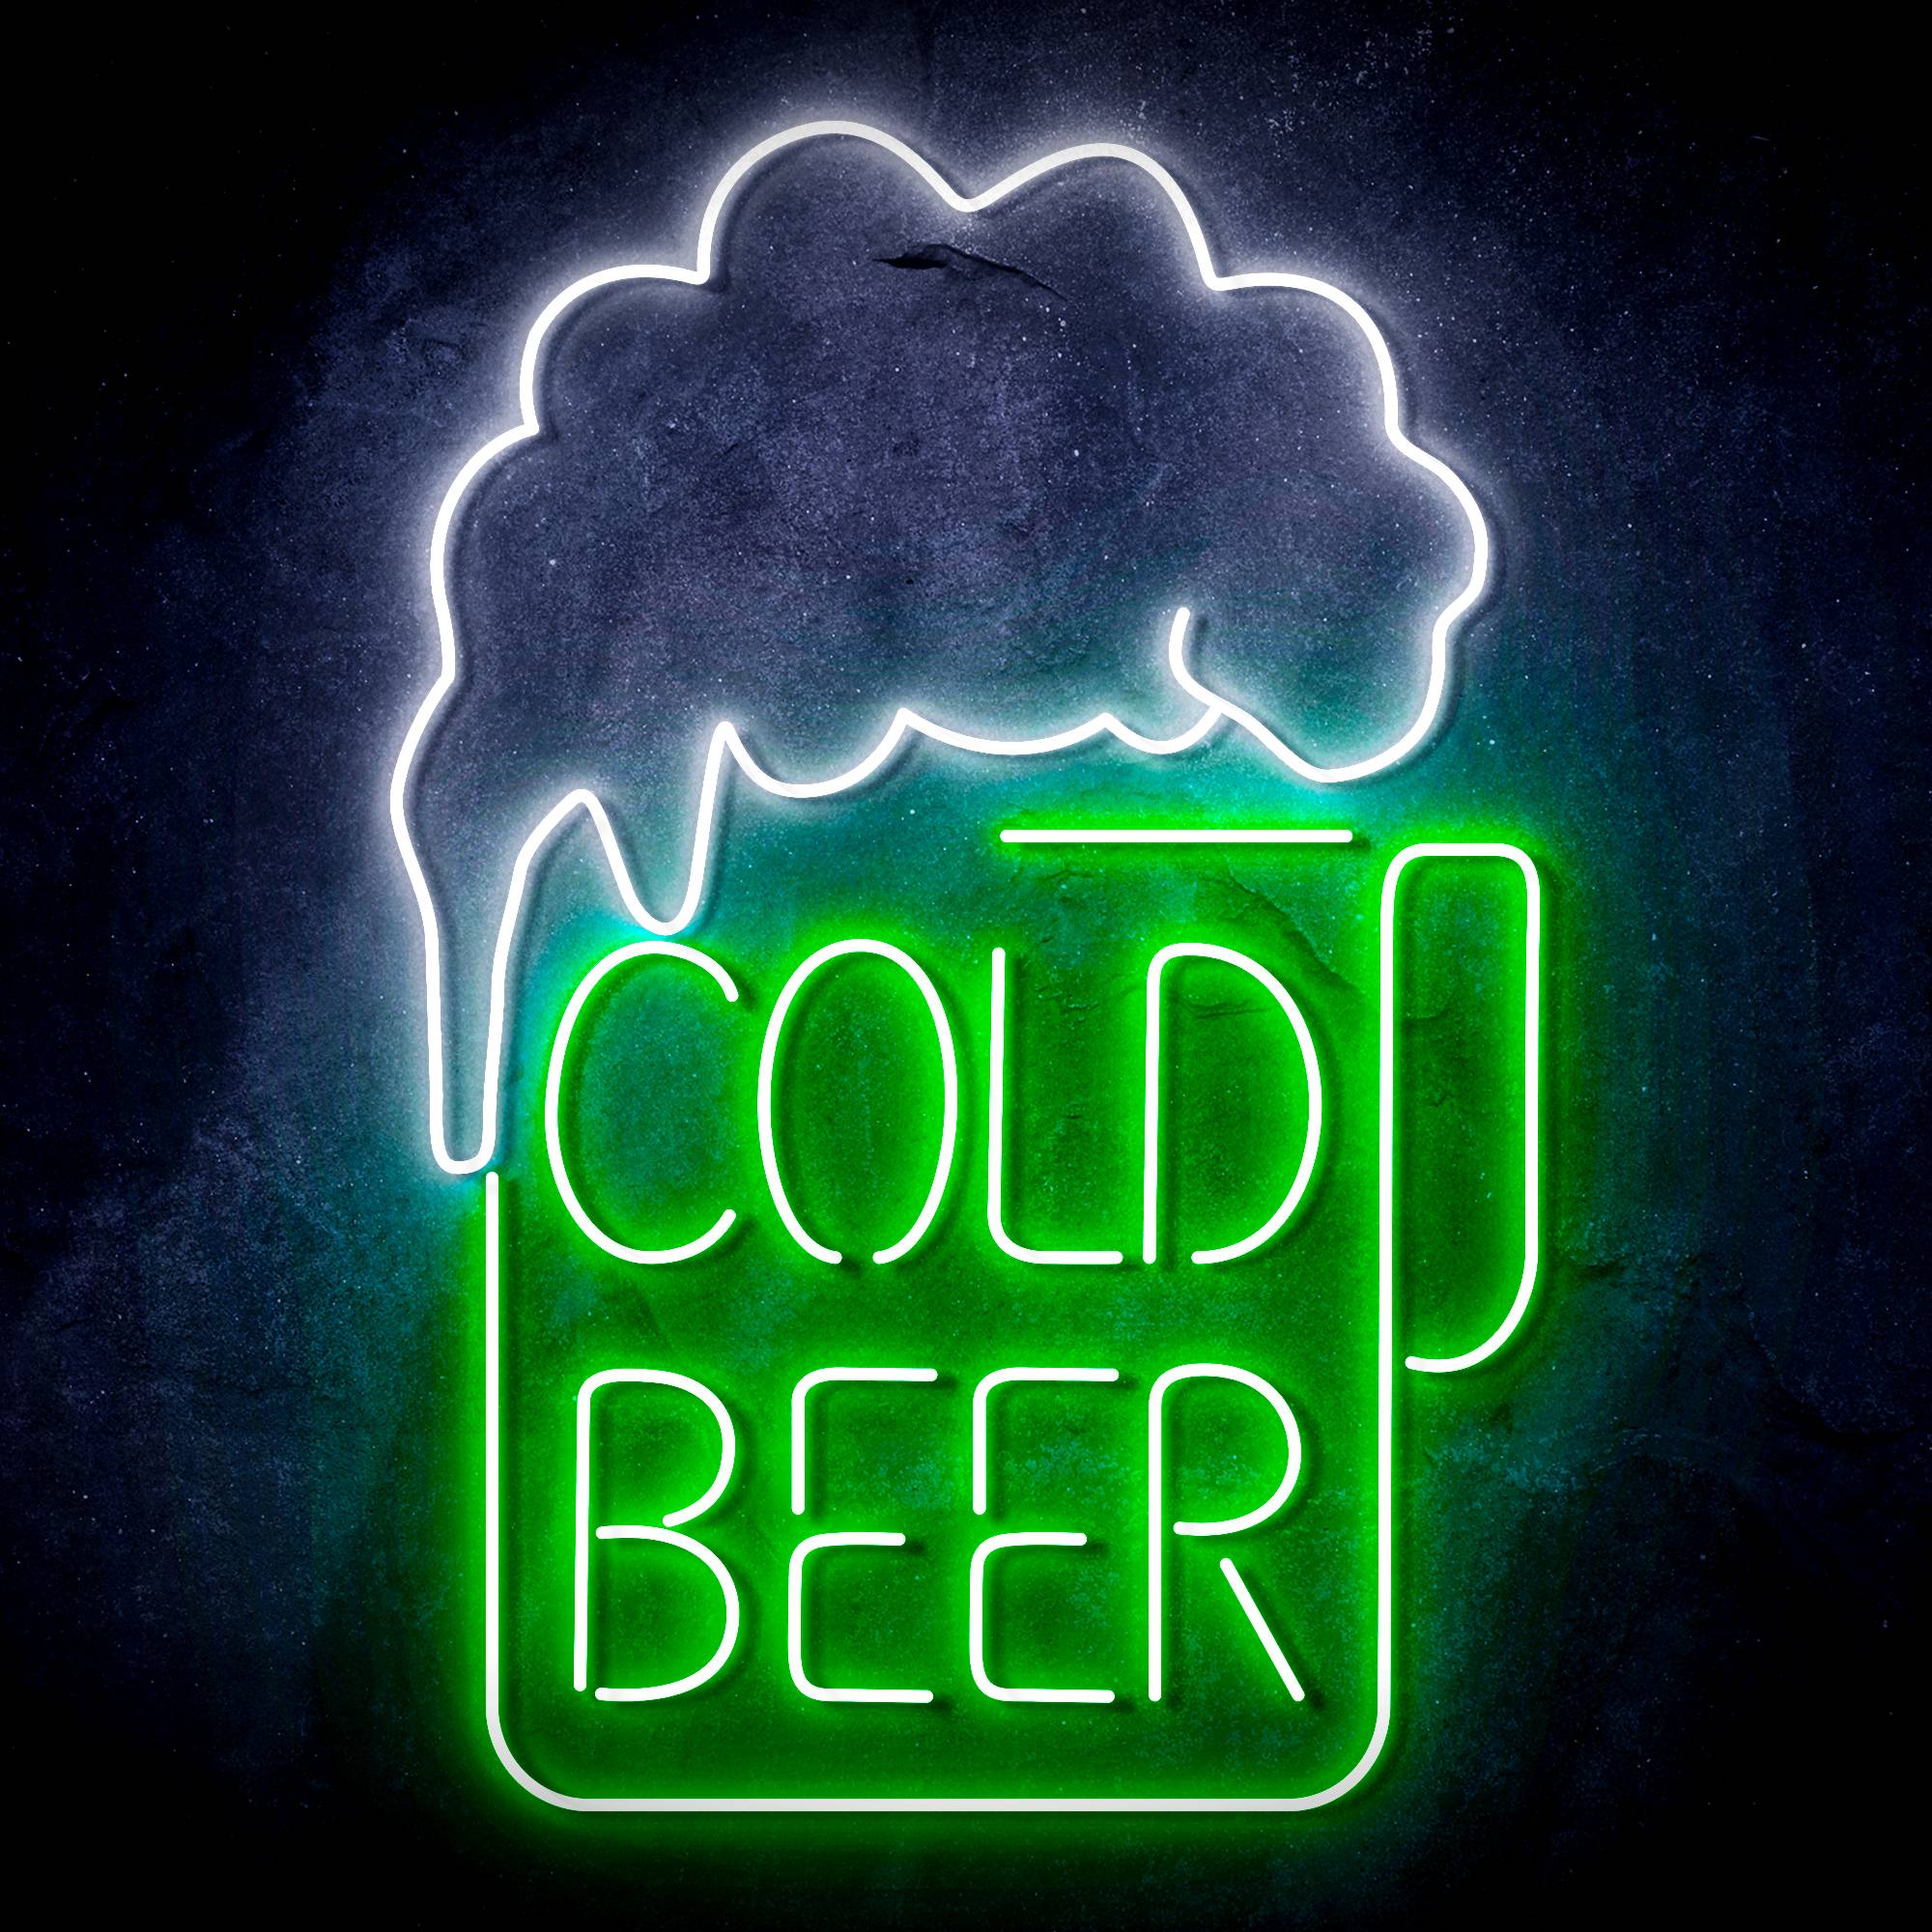 Cold Beer LED Neon Sign